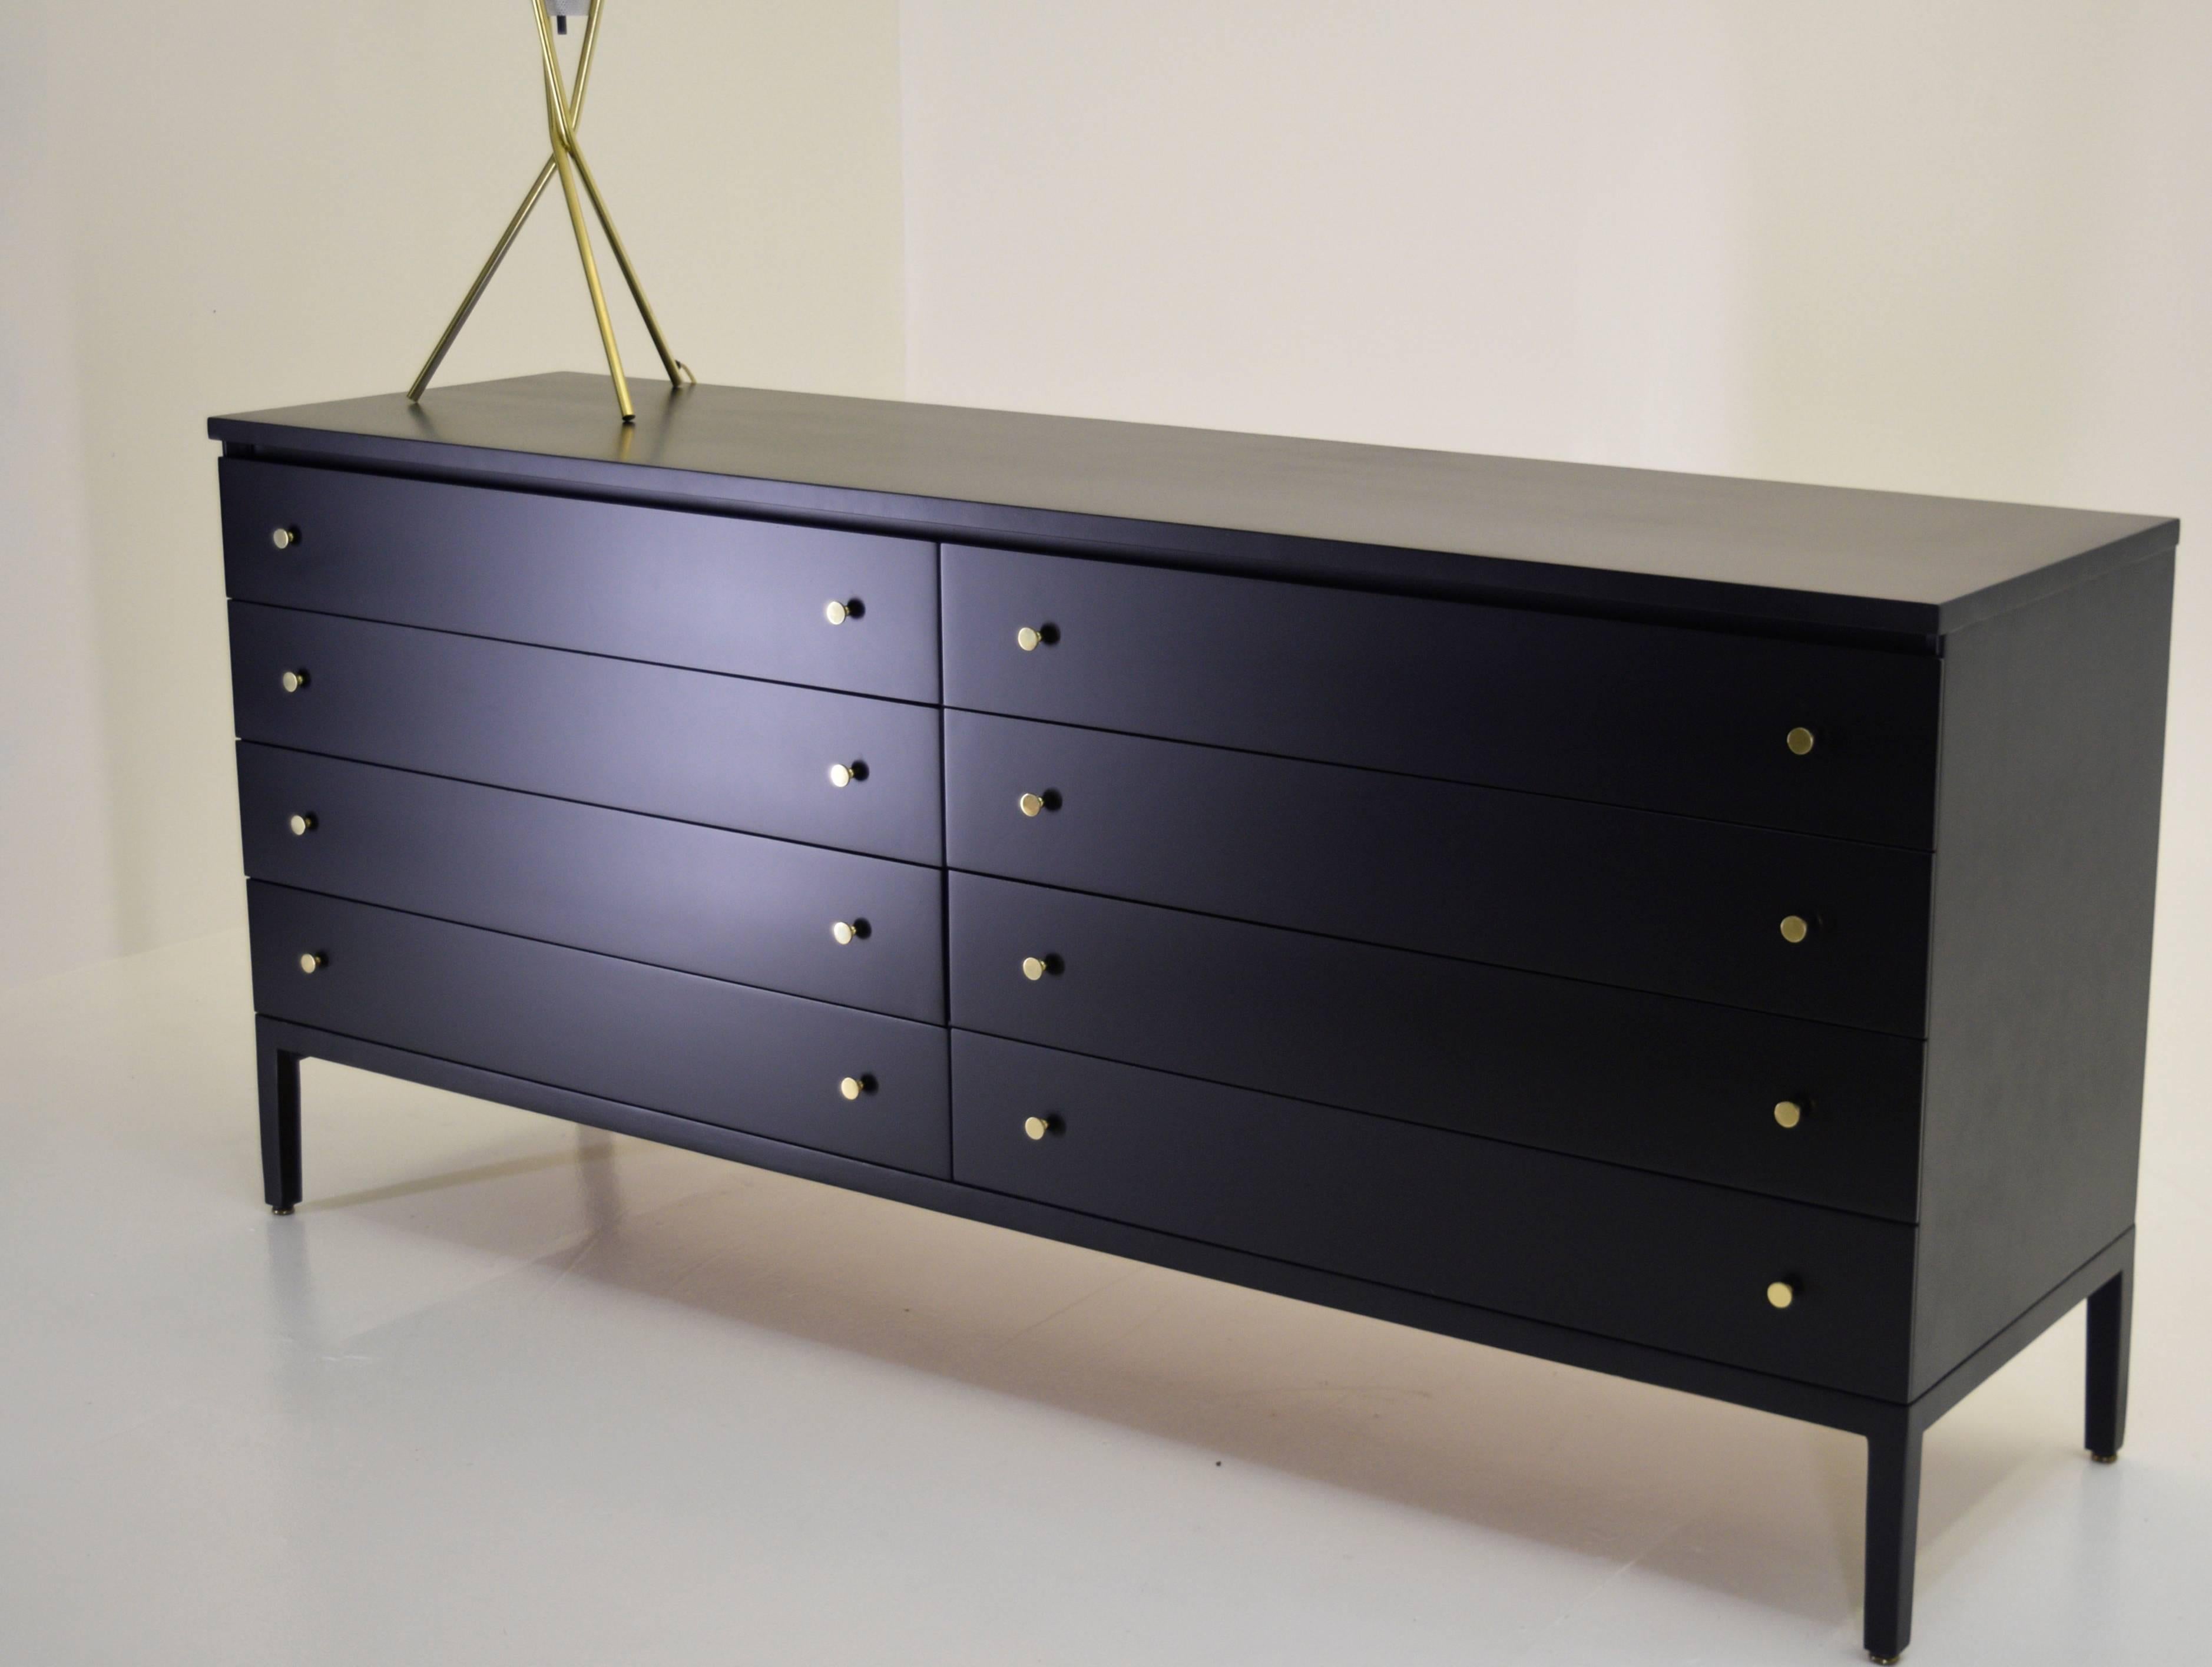 Mid-Century Modern Pristine Black Lacquer Double Dresser by Paul McCobb for Calvin Irwin Collection